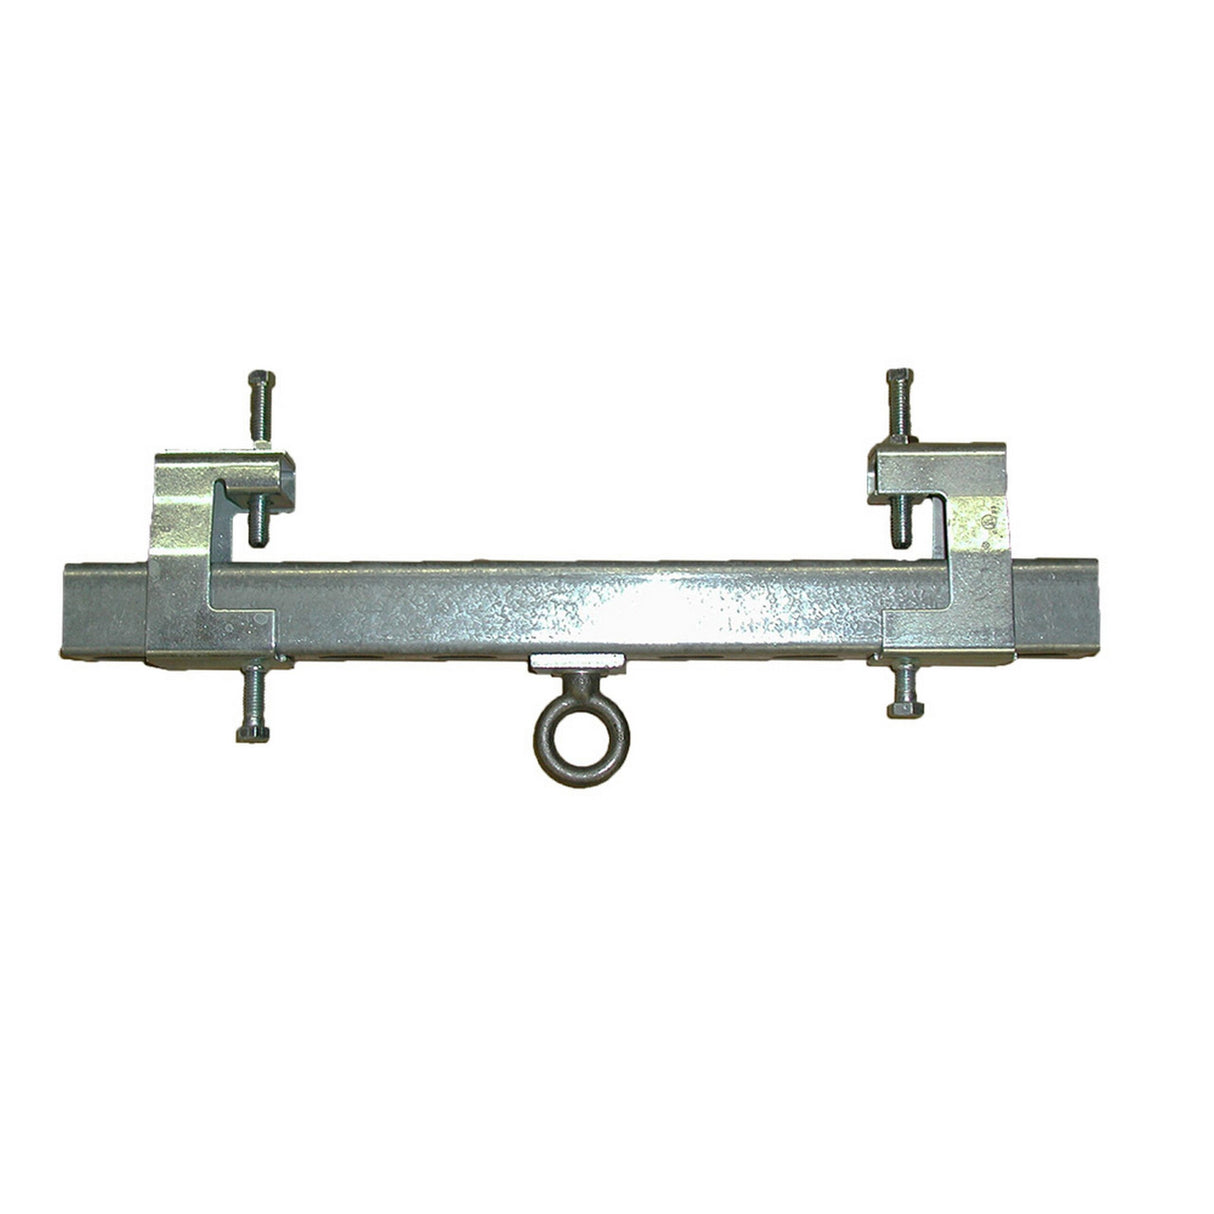 Soundsphere SS-BCL Beam Clamp for I-Beam Mounting